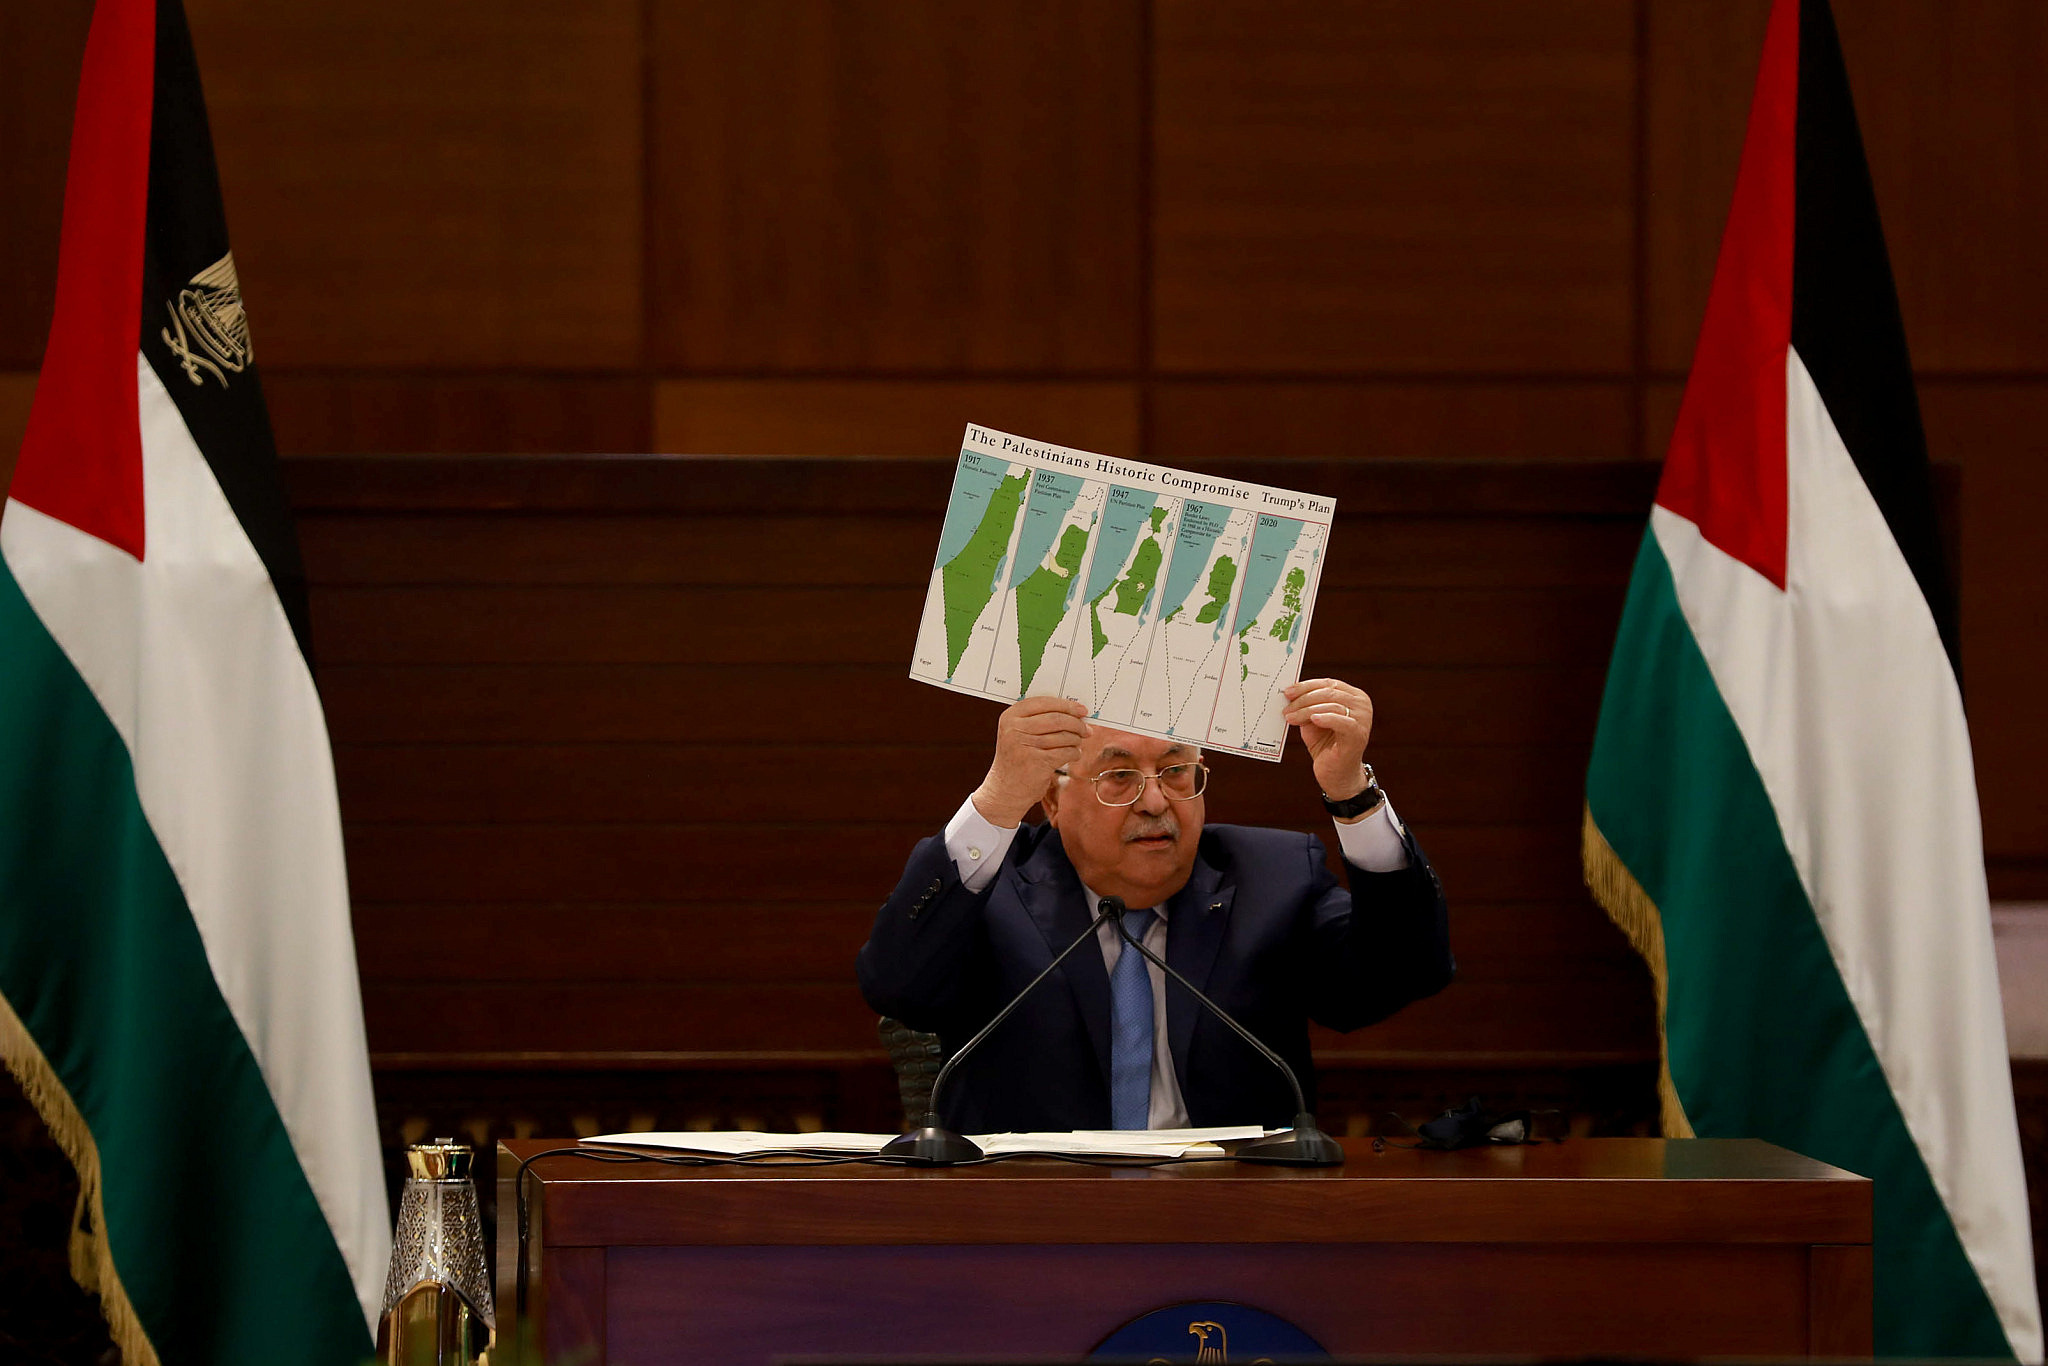 Palestinian President Mahmoud Abbas speaks during a meeting of the Palestinian leadership in the West Bank city of Ramallah, September 3, 2020. (Flash90)